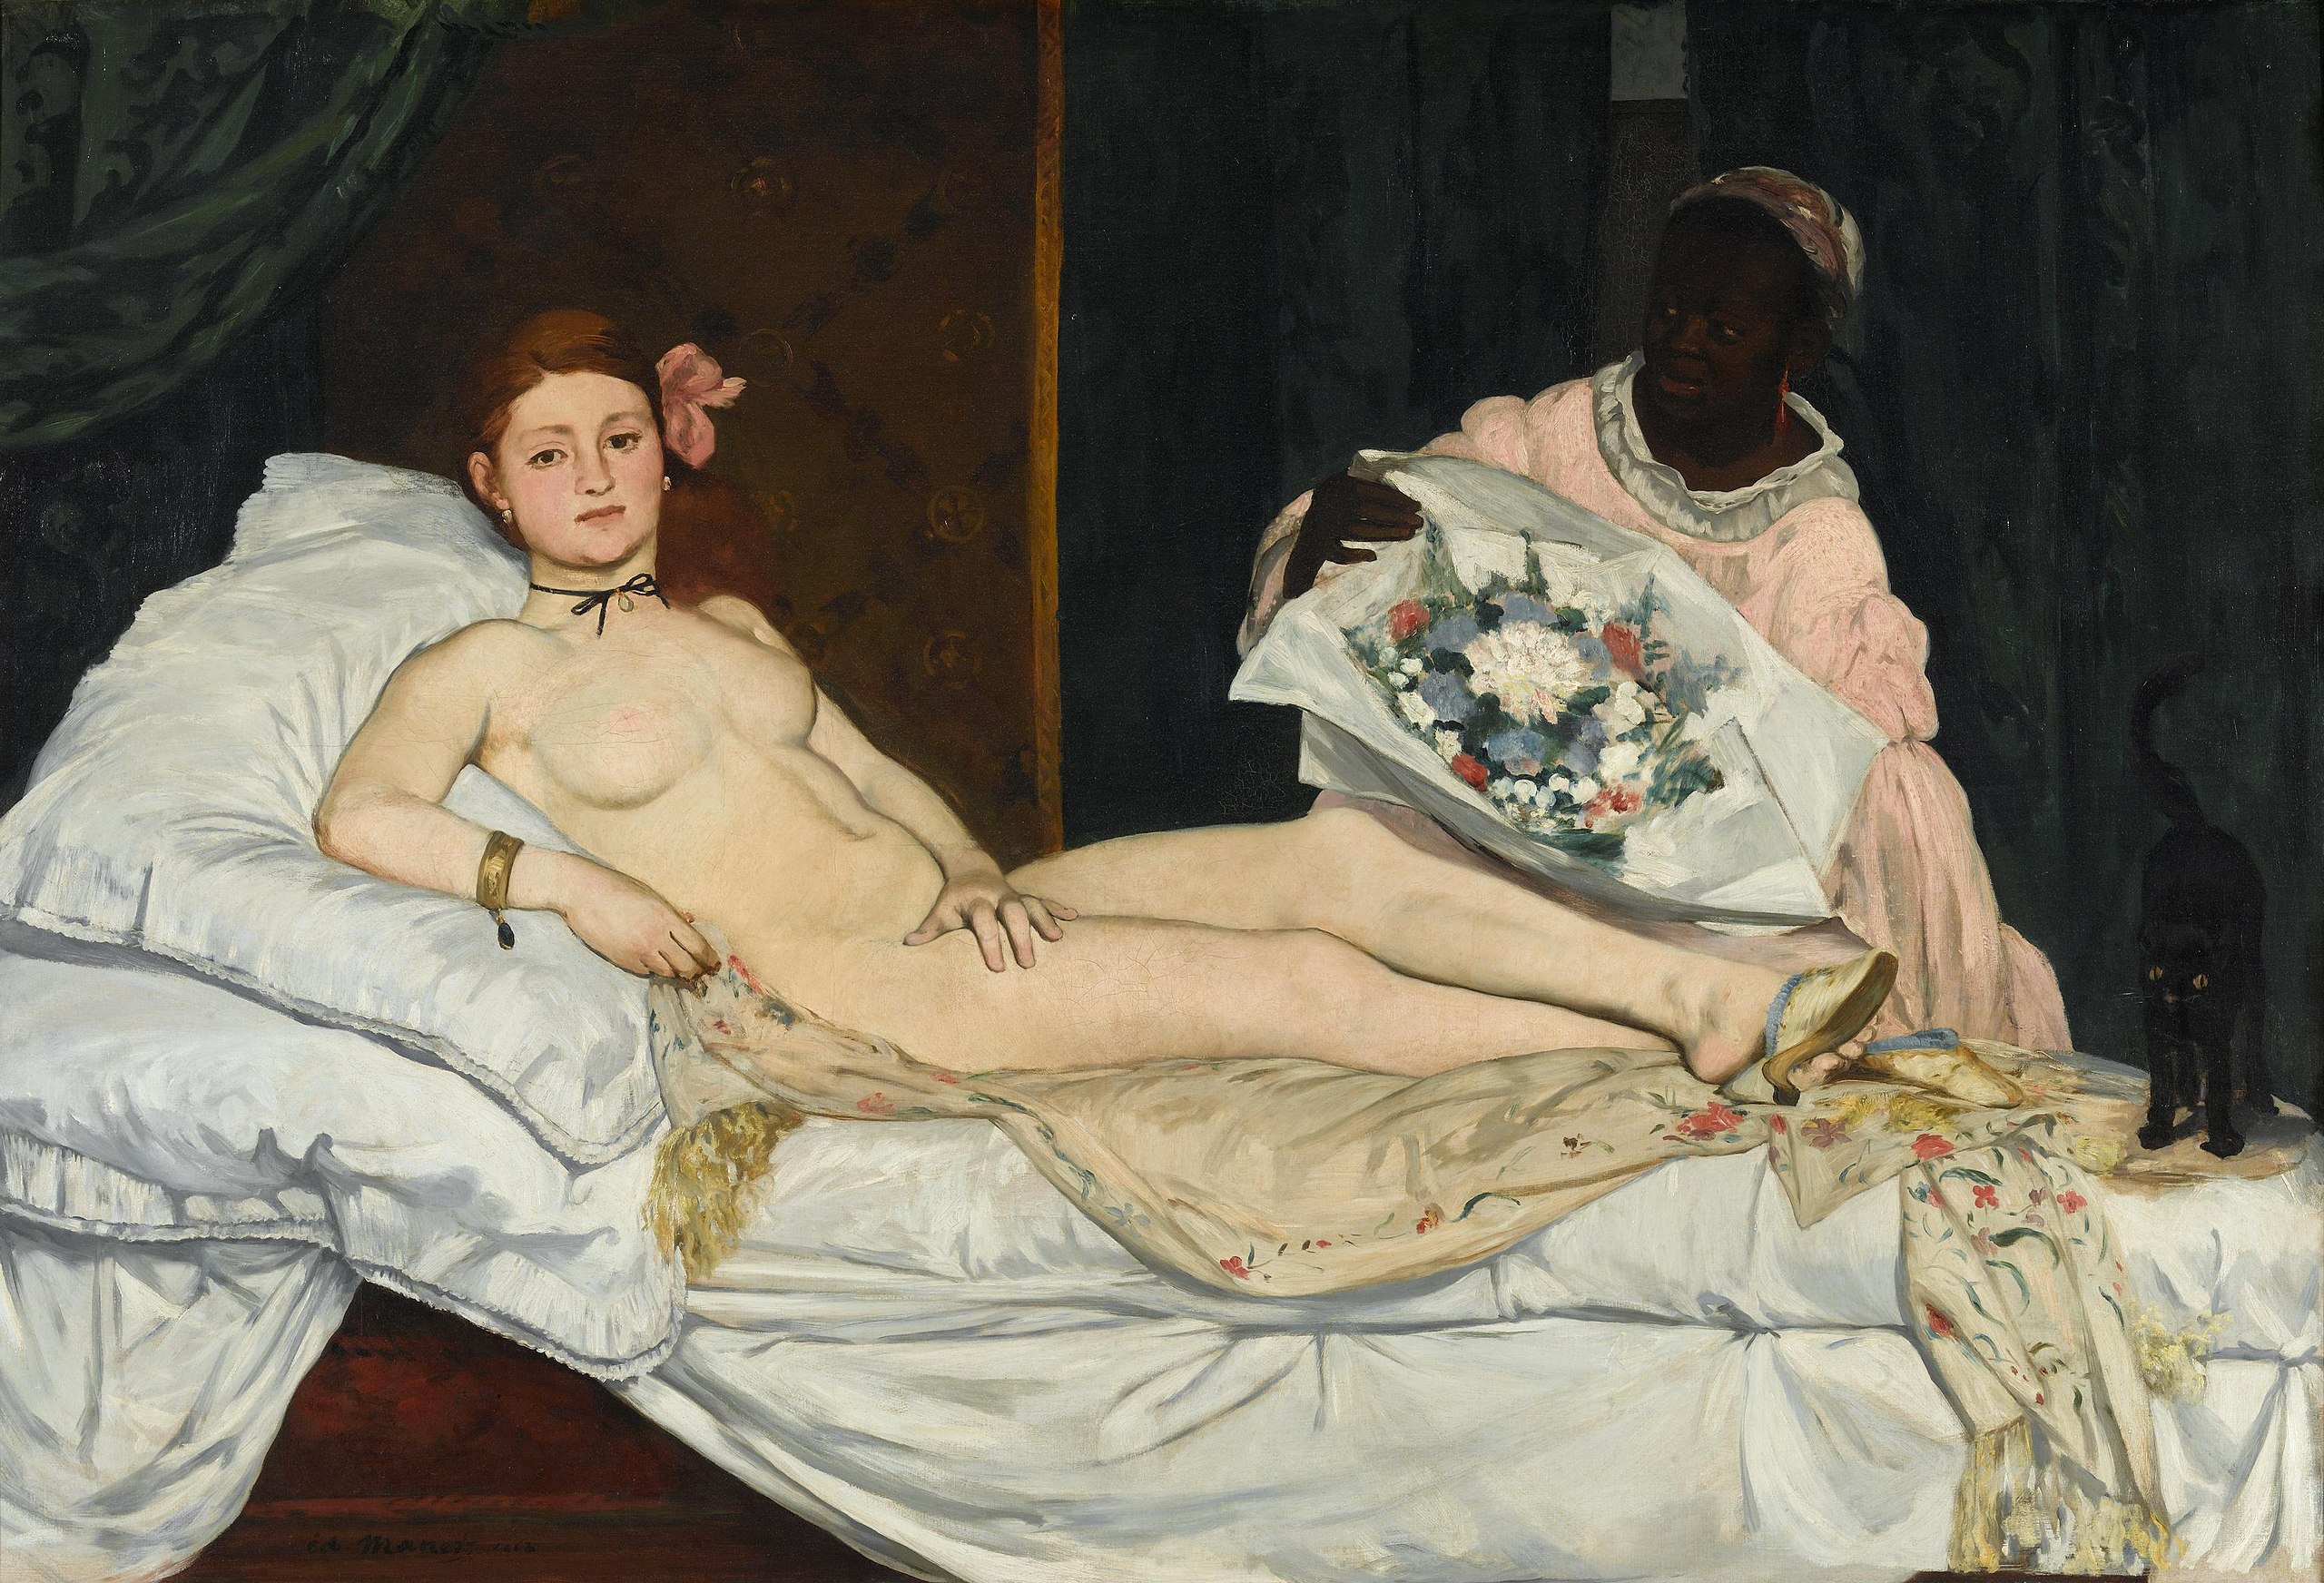 Olympia by Édouard Manet - 1863 - 190 x 130 cm Musée d'Orsay